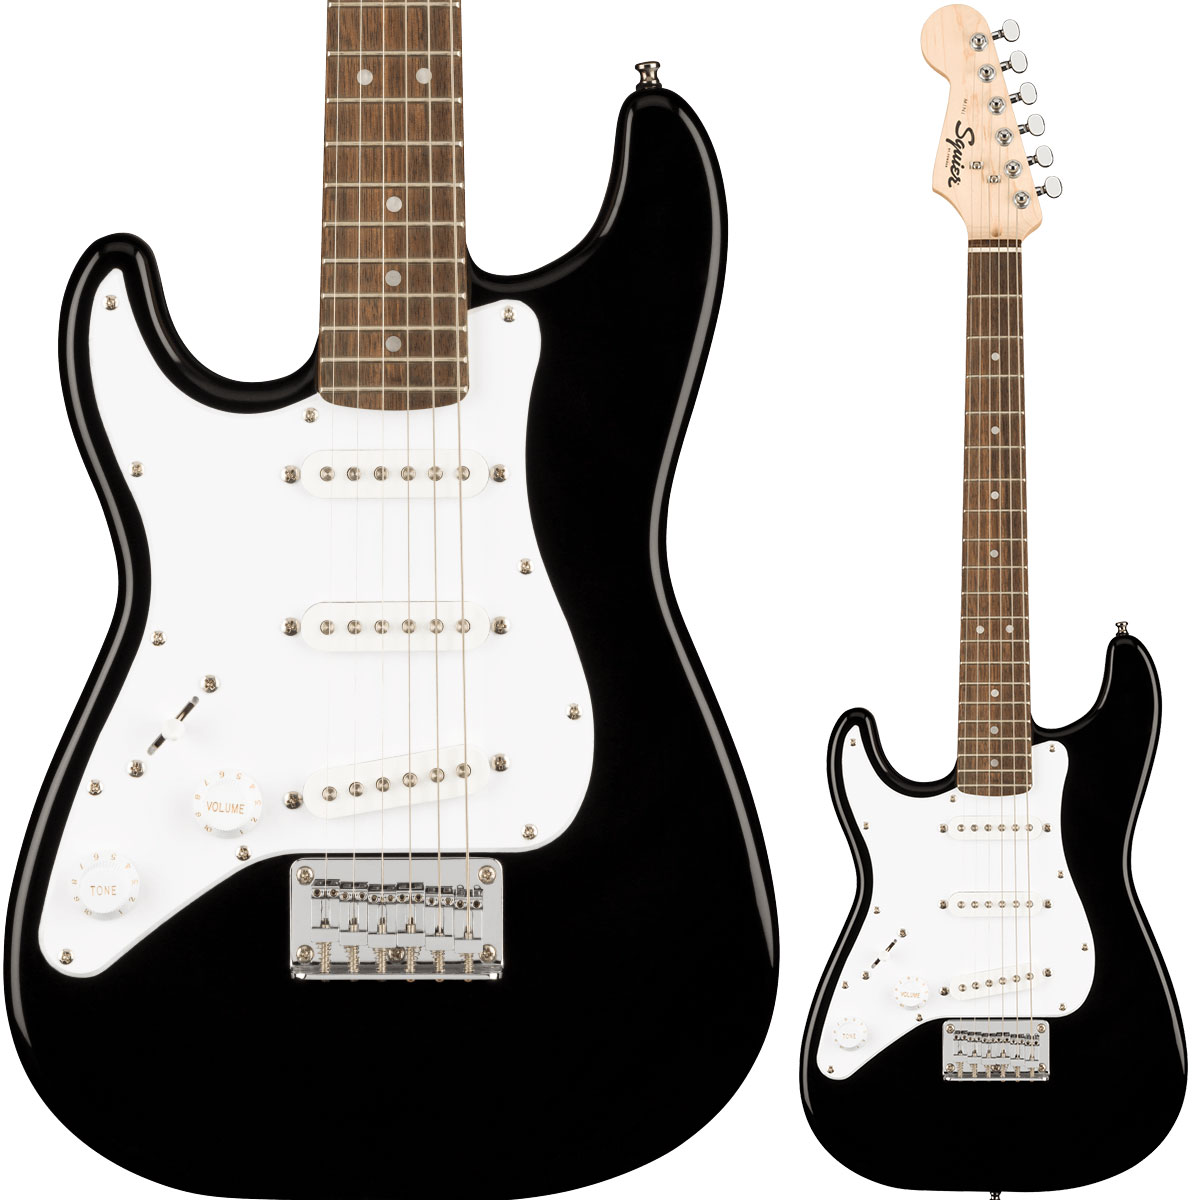 Squier by Fender Mini Stratocaster Left-Handed Black エレキギター ...